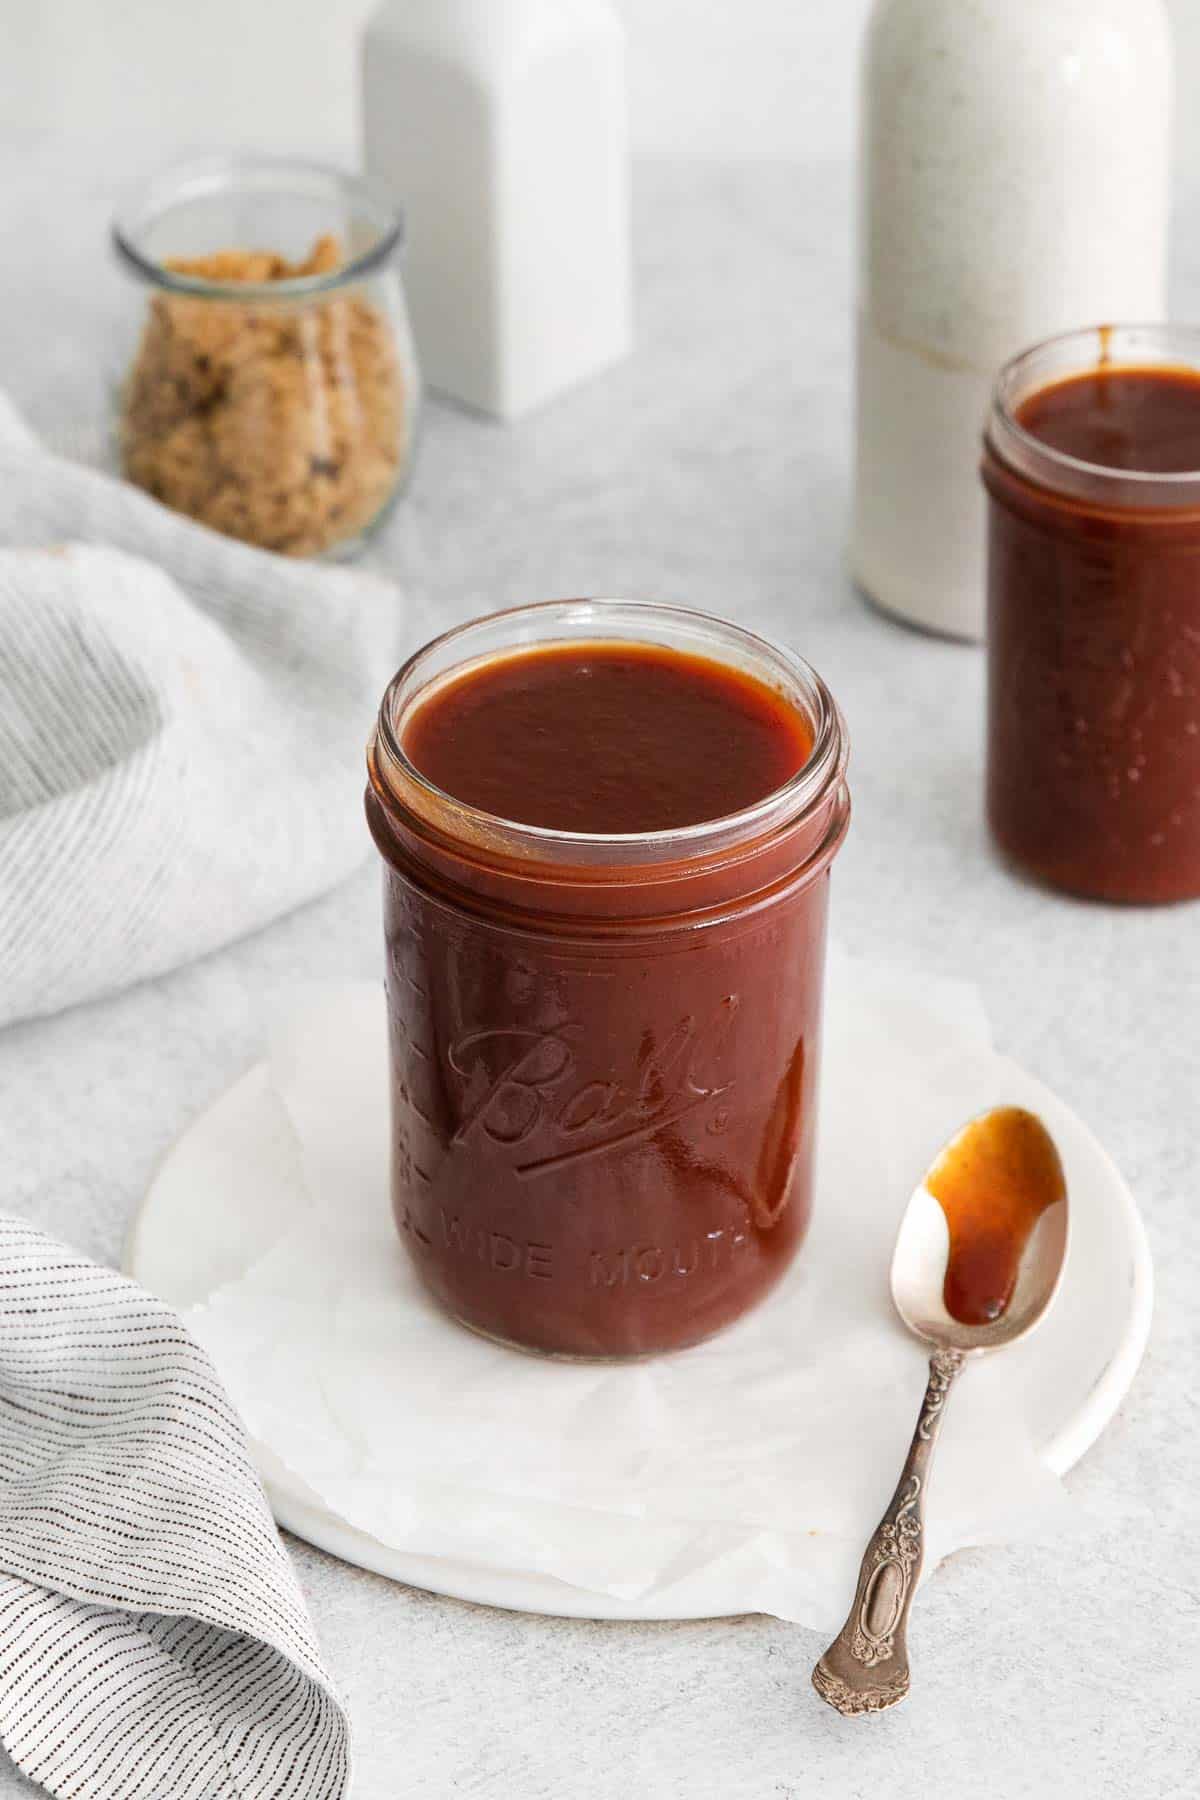 Gluten-free BBQ sauce in a glass jar, with a spoon next to it